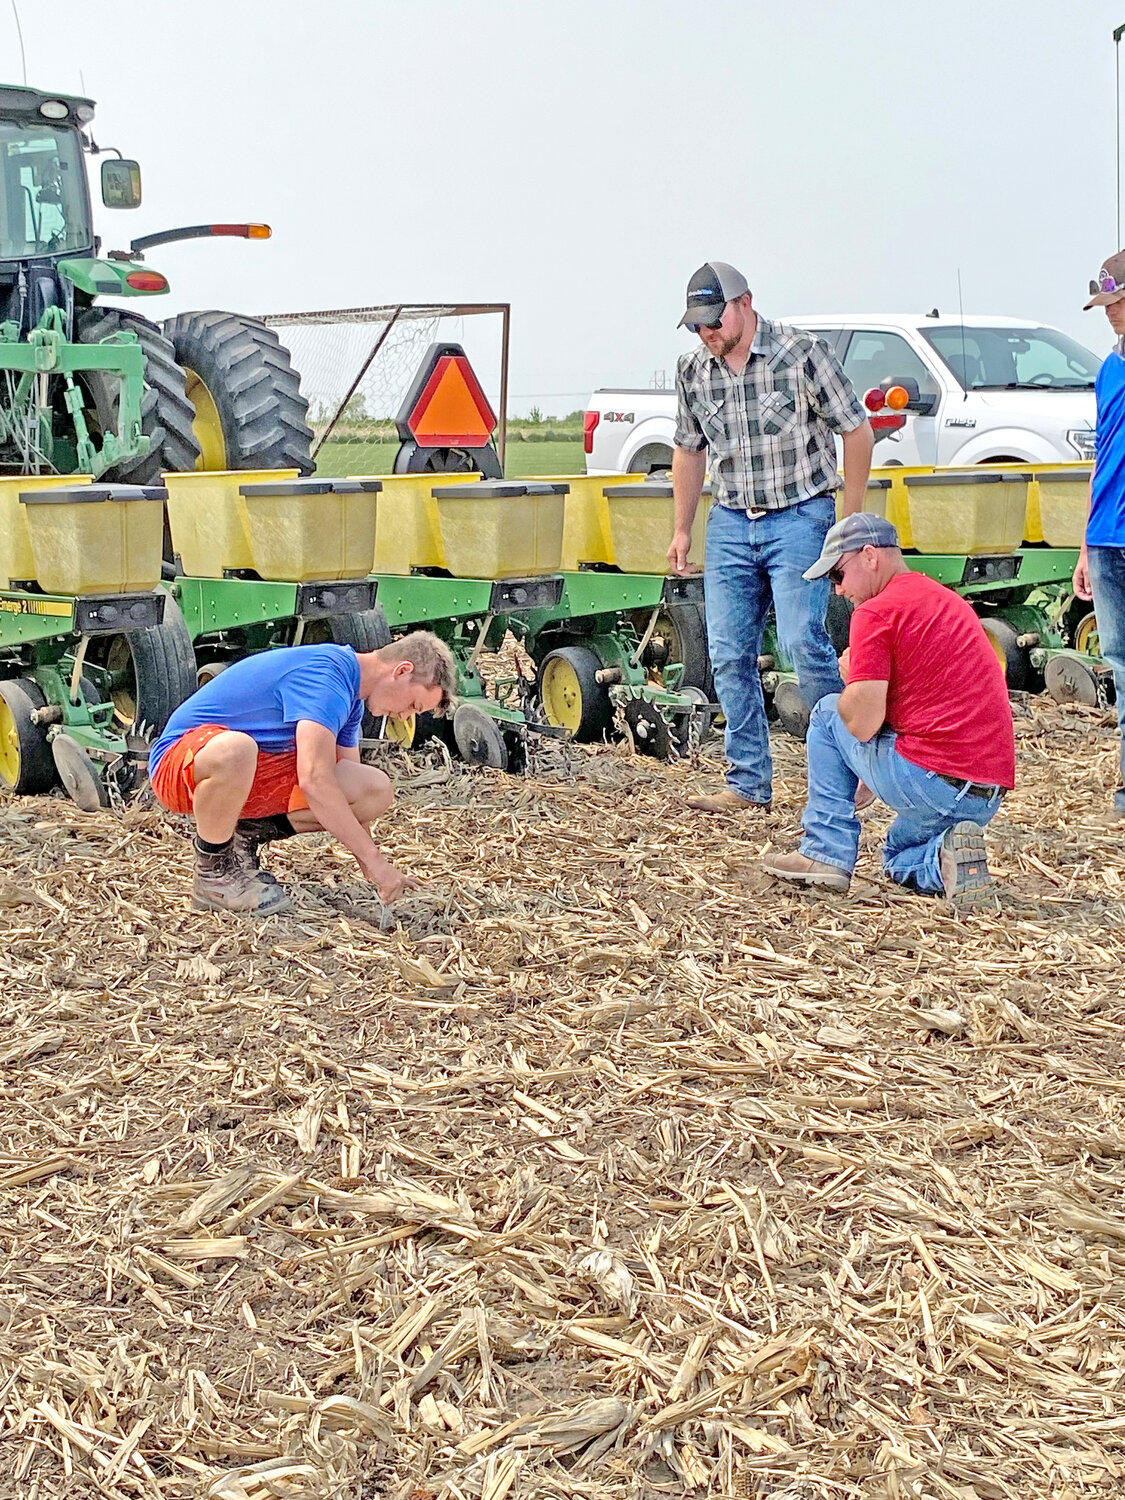 Jack Peiffer (junior), Zach Trower (Syngenta), and Brian Chalupa checking seed depth within the first few feet of planting the Highland FFA test plot.